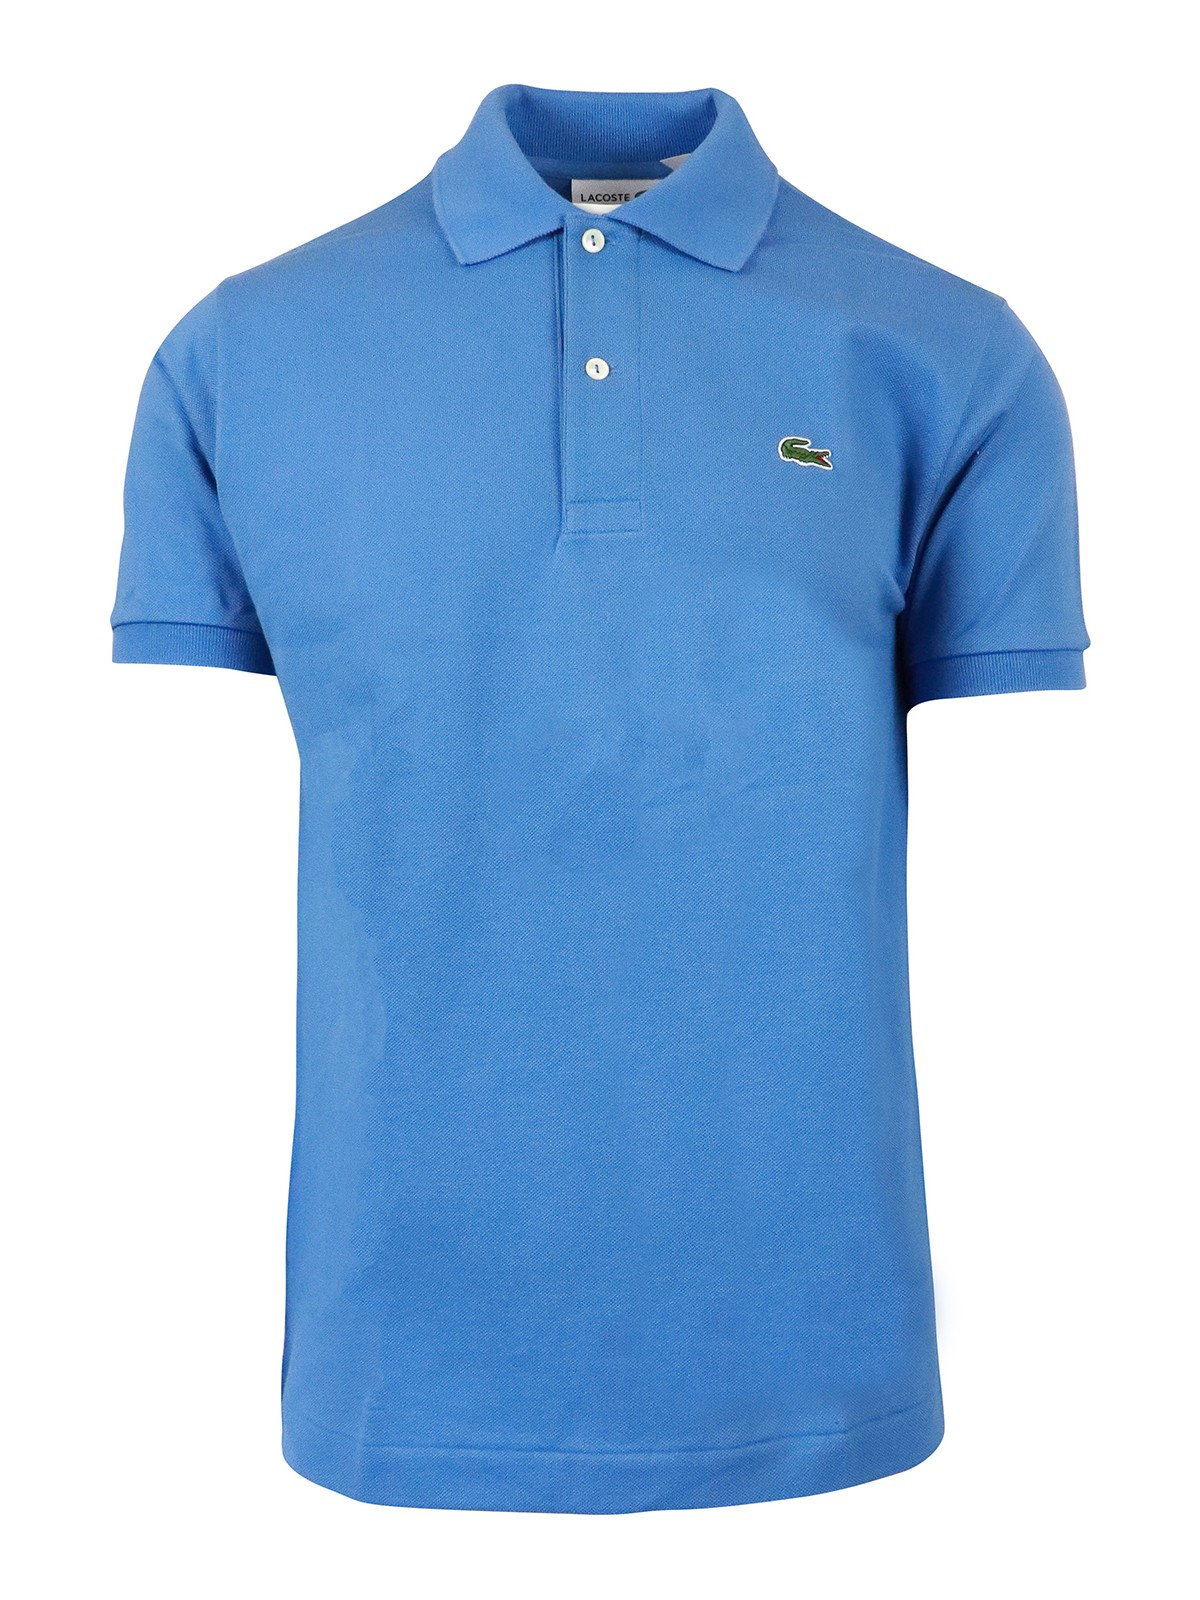 shirts Lacoste - Piqué polo - 1212776 | Shop online at THEBS